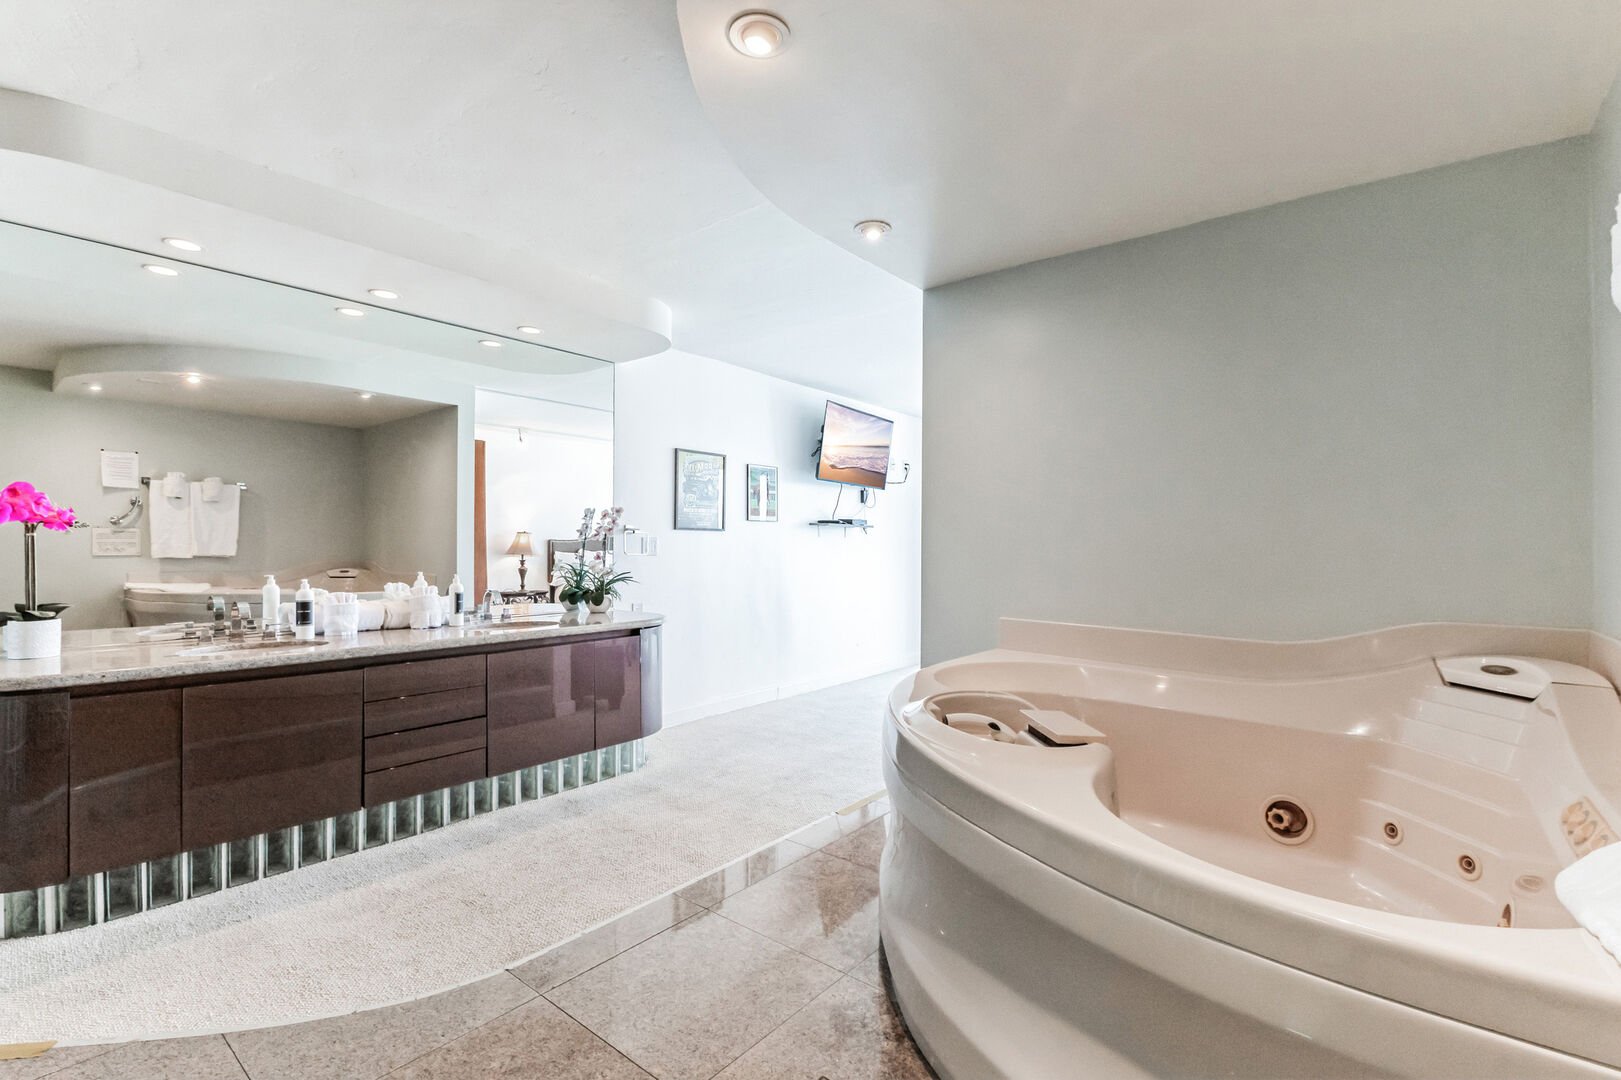 Primary Bathroom Suite / Jetted Tub